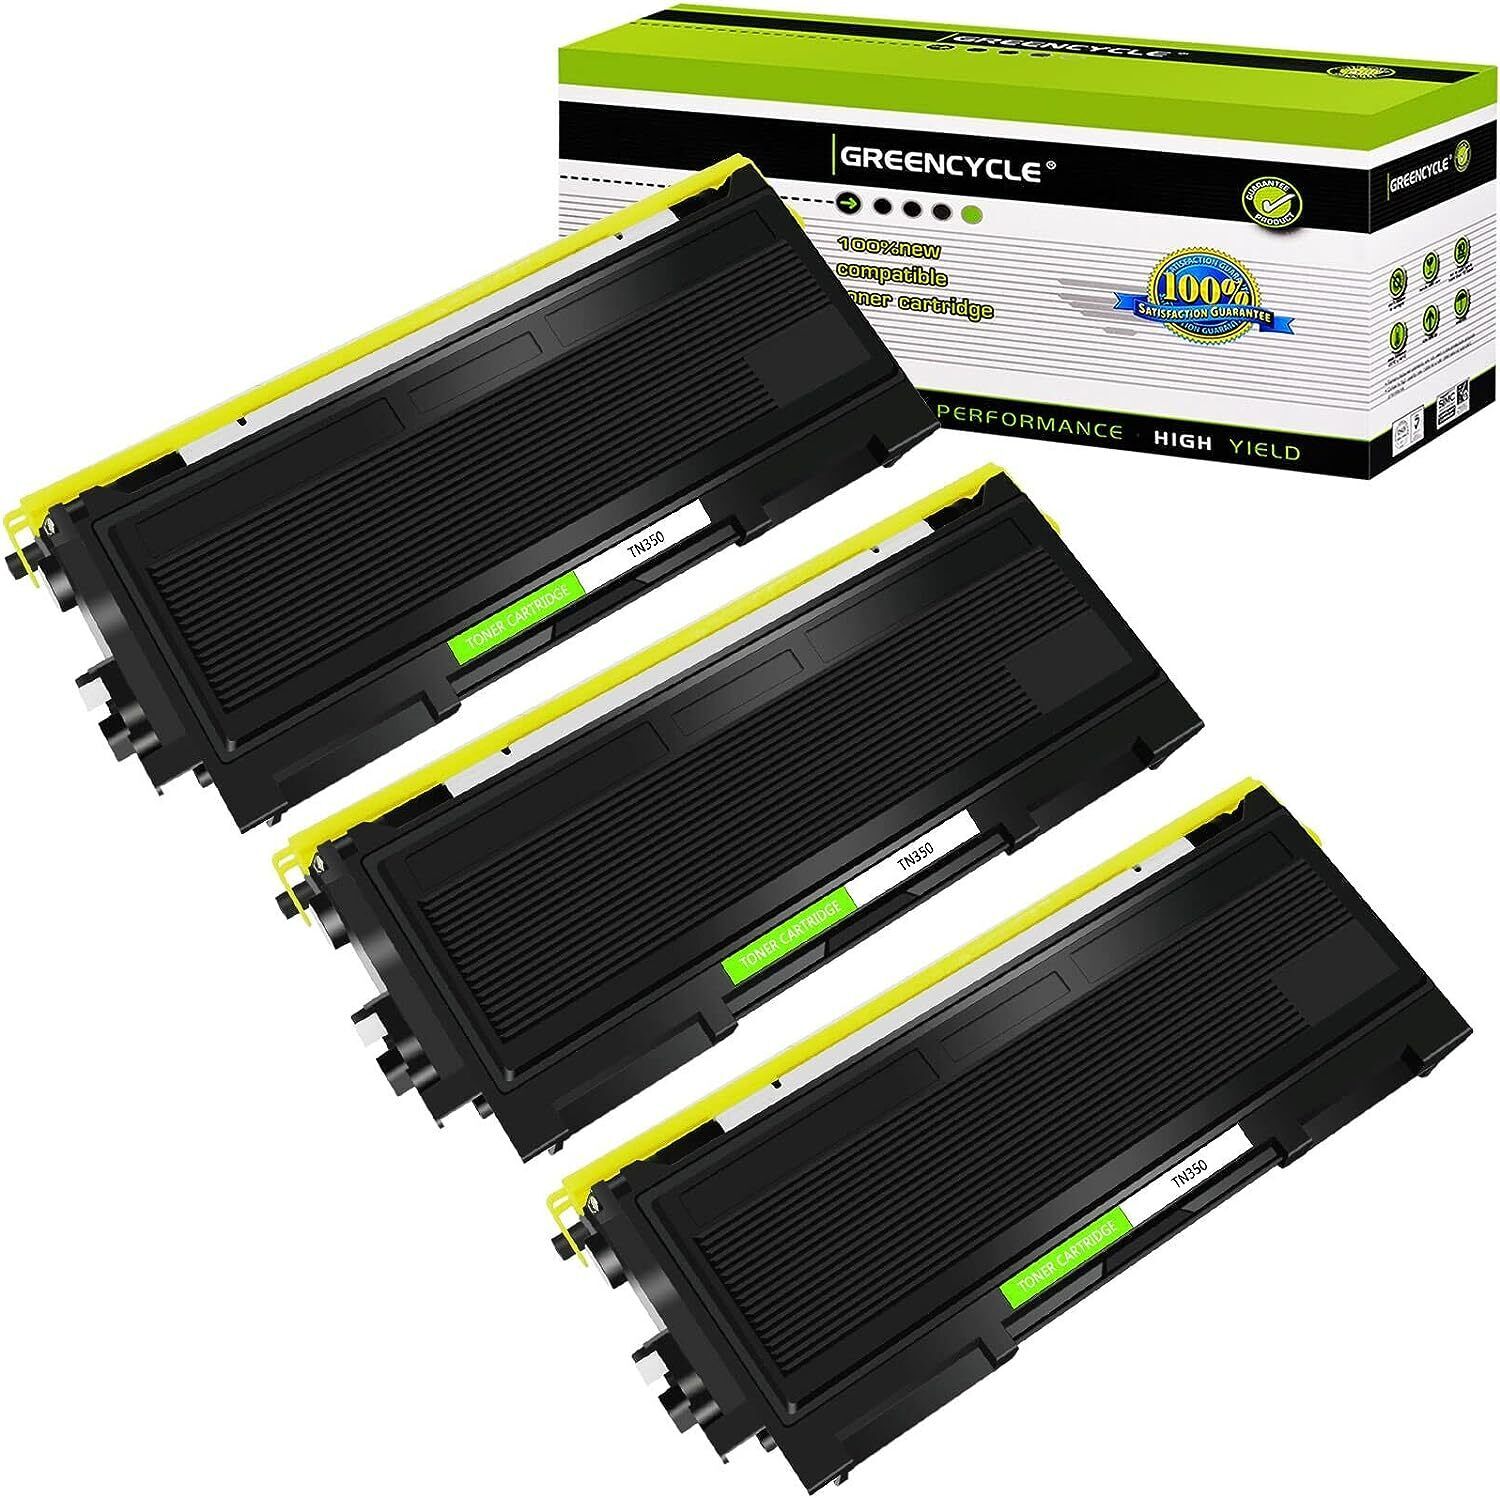 3PK High Yield TN-350 Toner Cartridge for Brother MFC-7225N MFC-7220 Printers